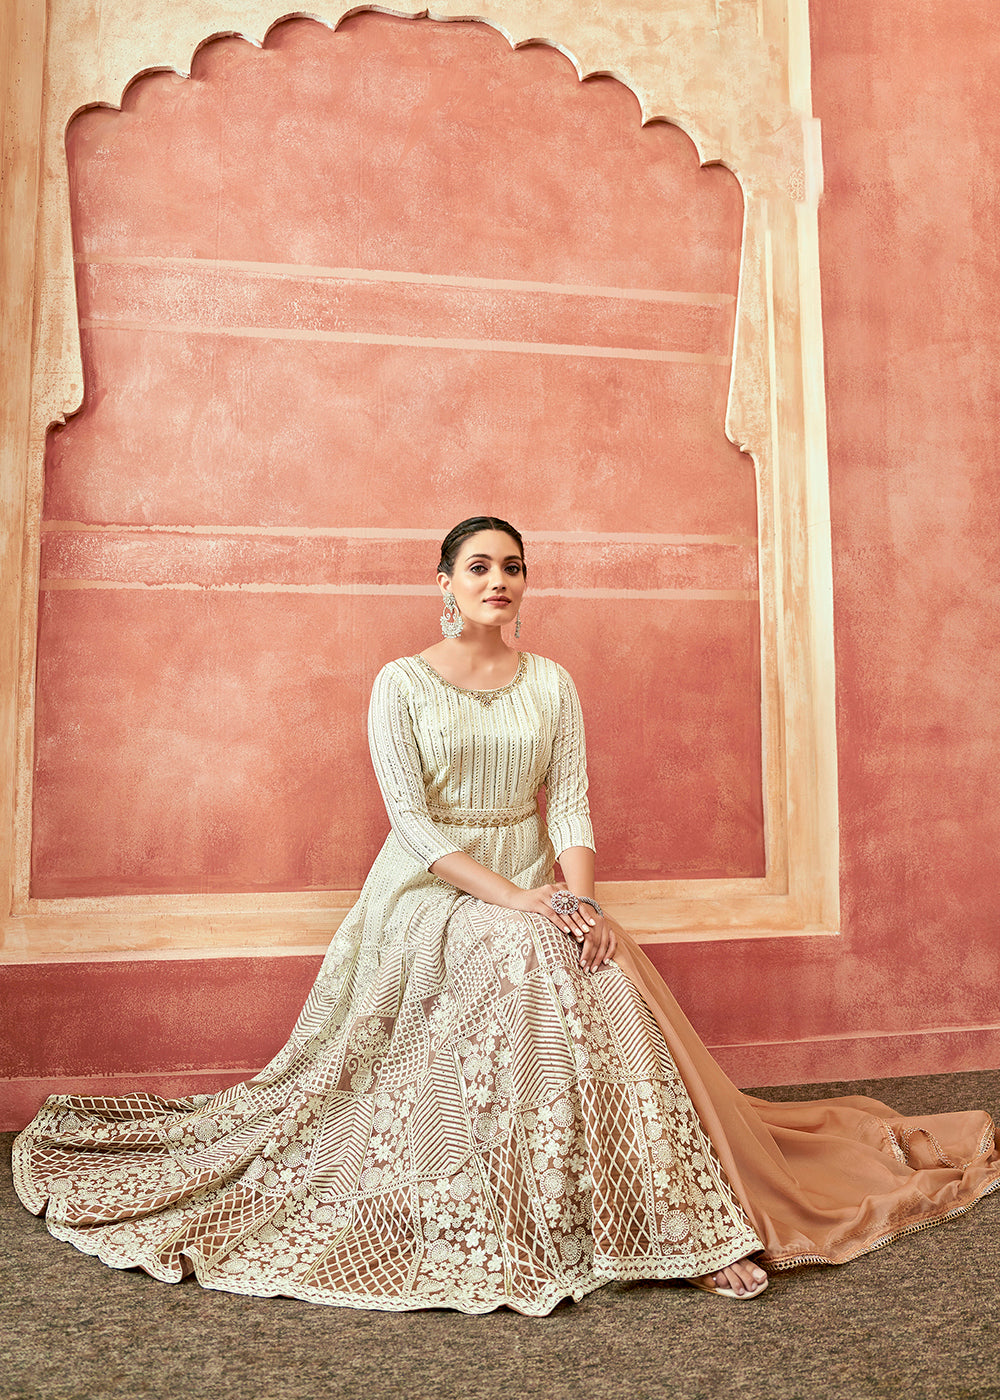 Buy Now Off White & Rust Georgette Embroidered Festive Anarkali Suit Online in USA, UK, Australia, New Zealand, Canada & Worldwide at Empress Clothing.